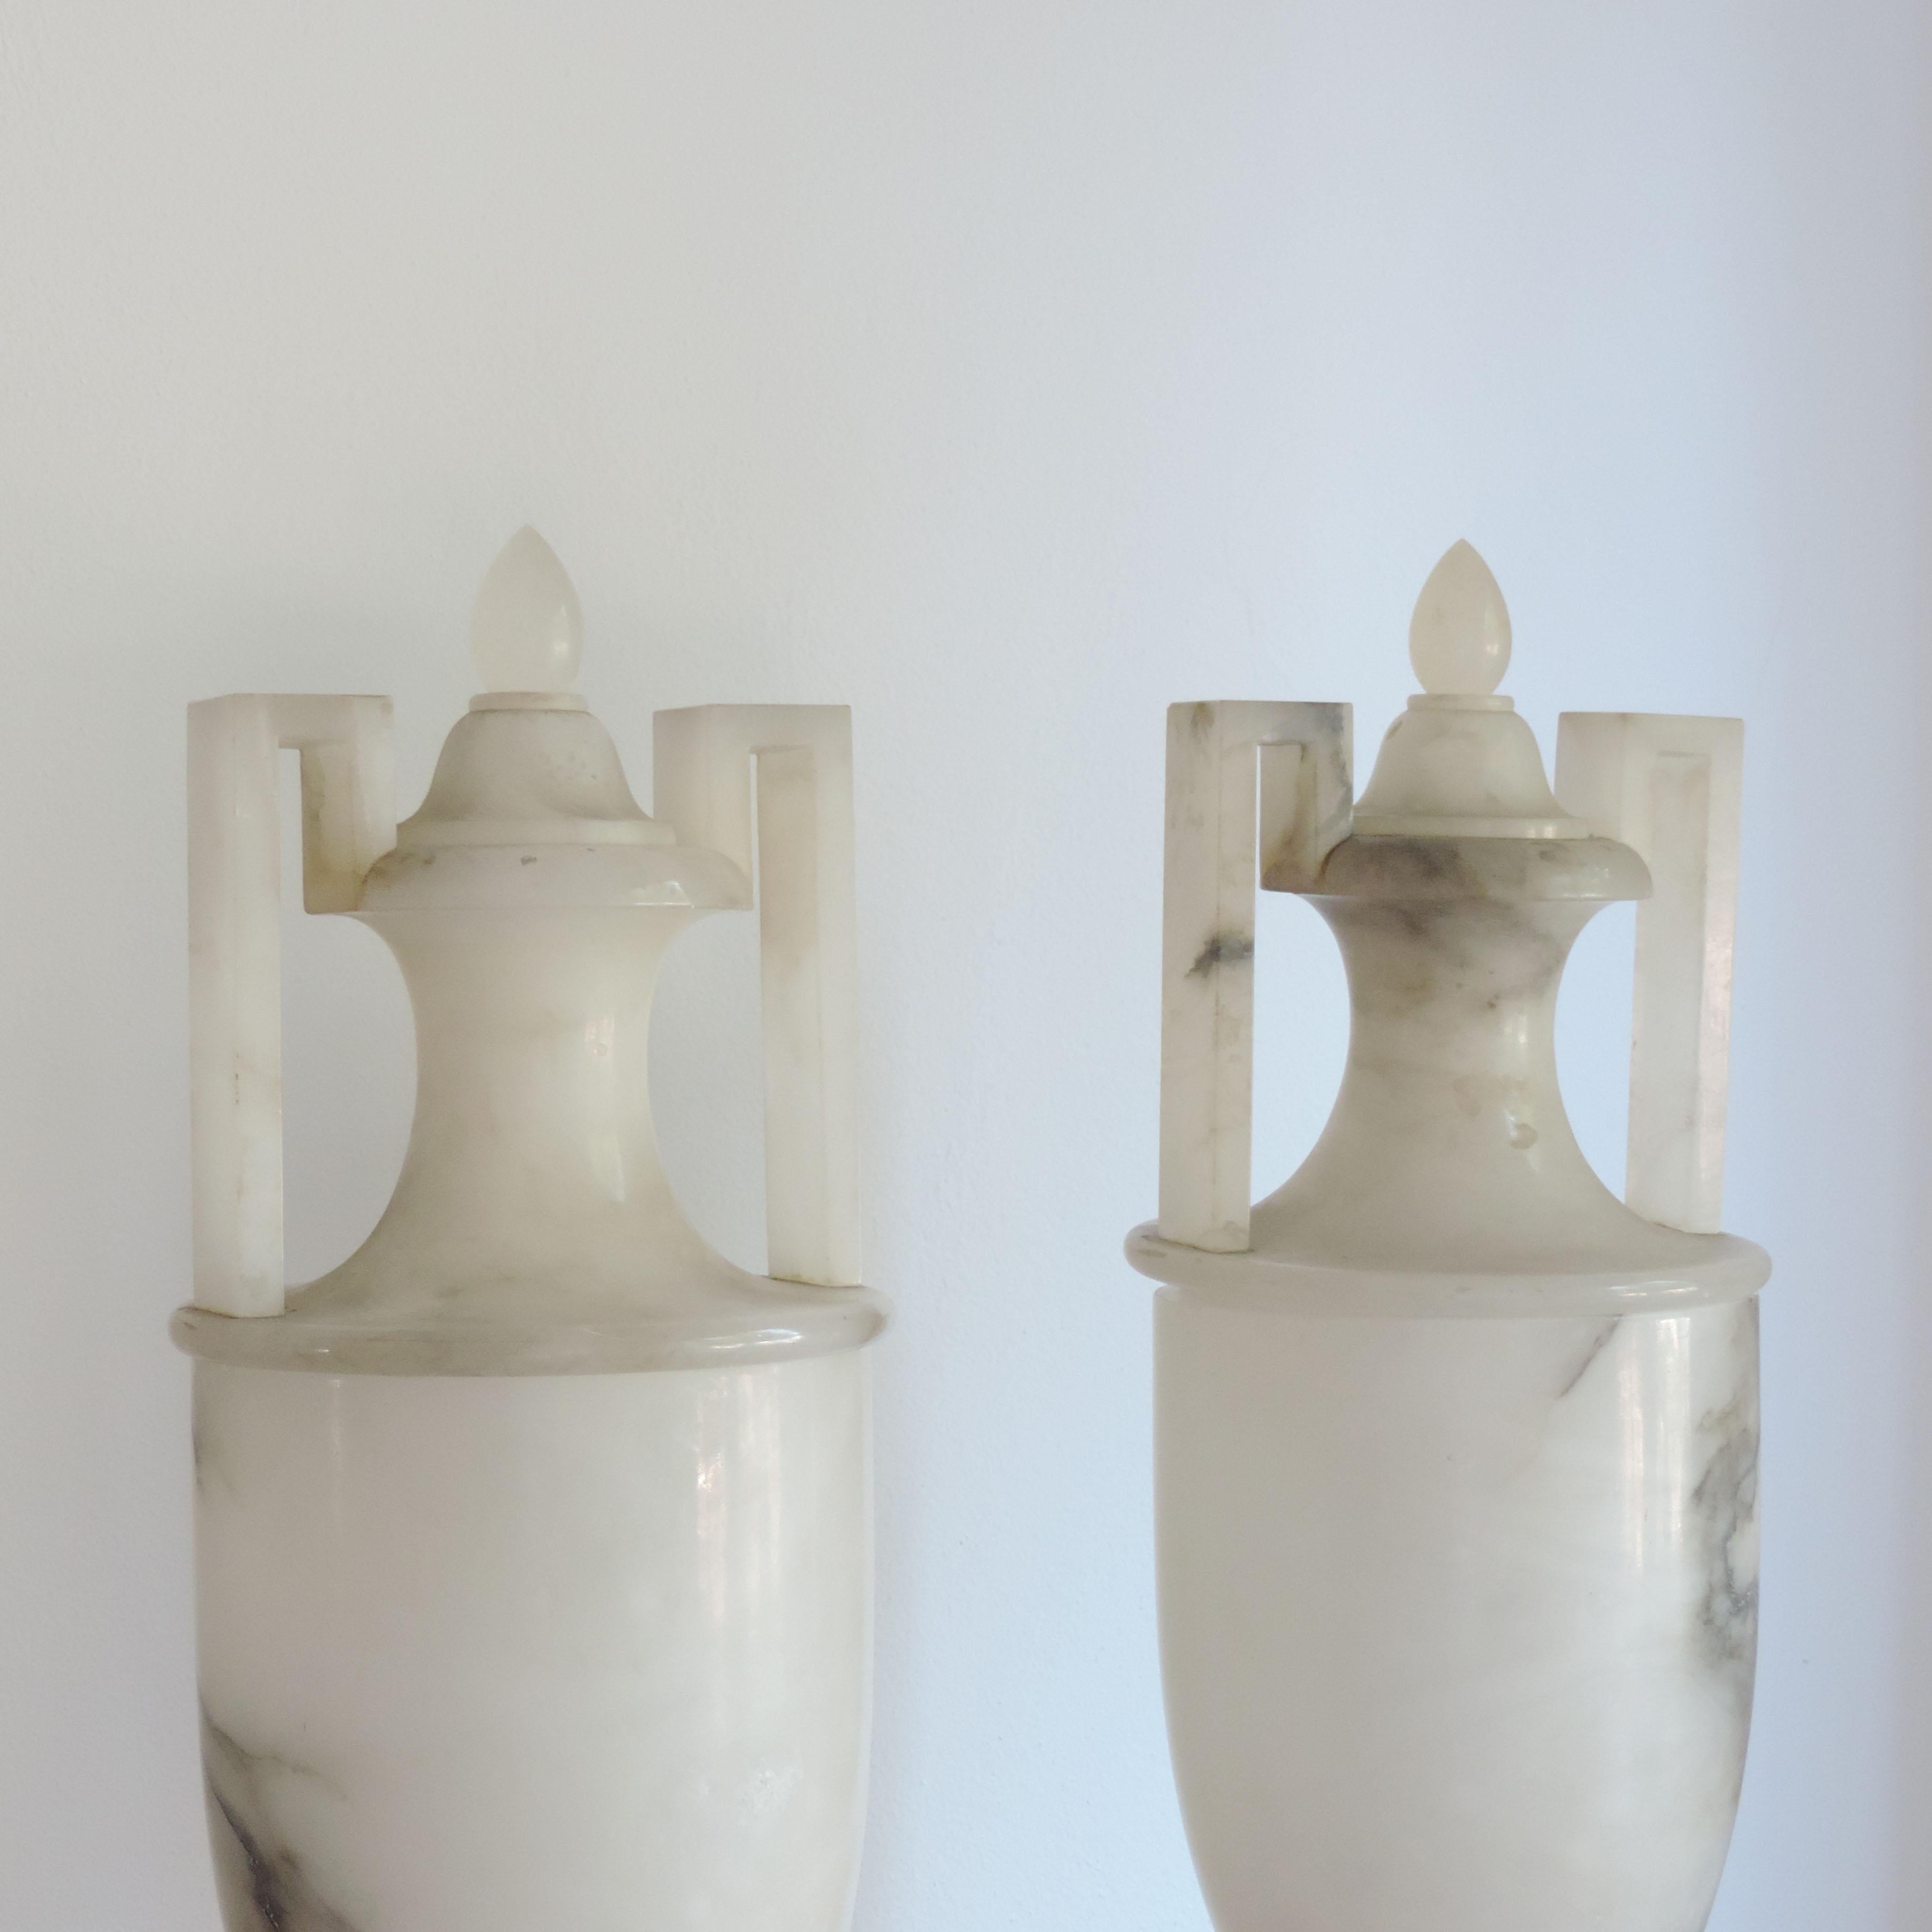 Monumental Pair of Italian Neo-Classical Style Art Deco 1920s Alabaster Urn Table Lamps.
Beautifully crafted and amazing when lit.